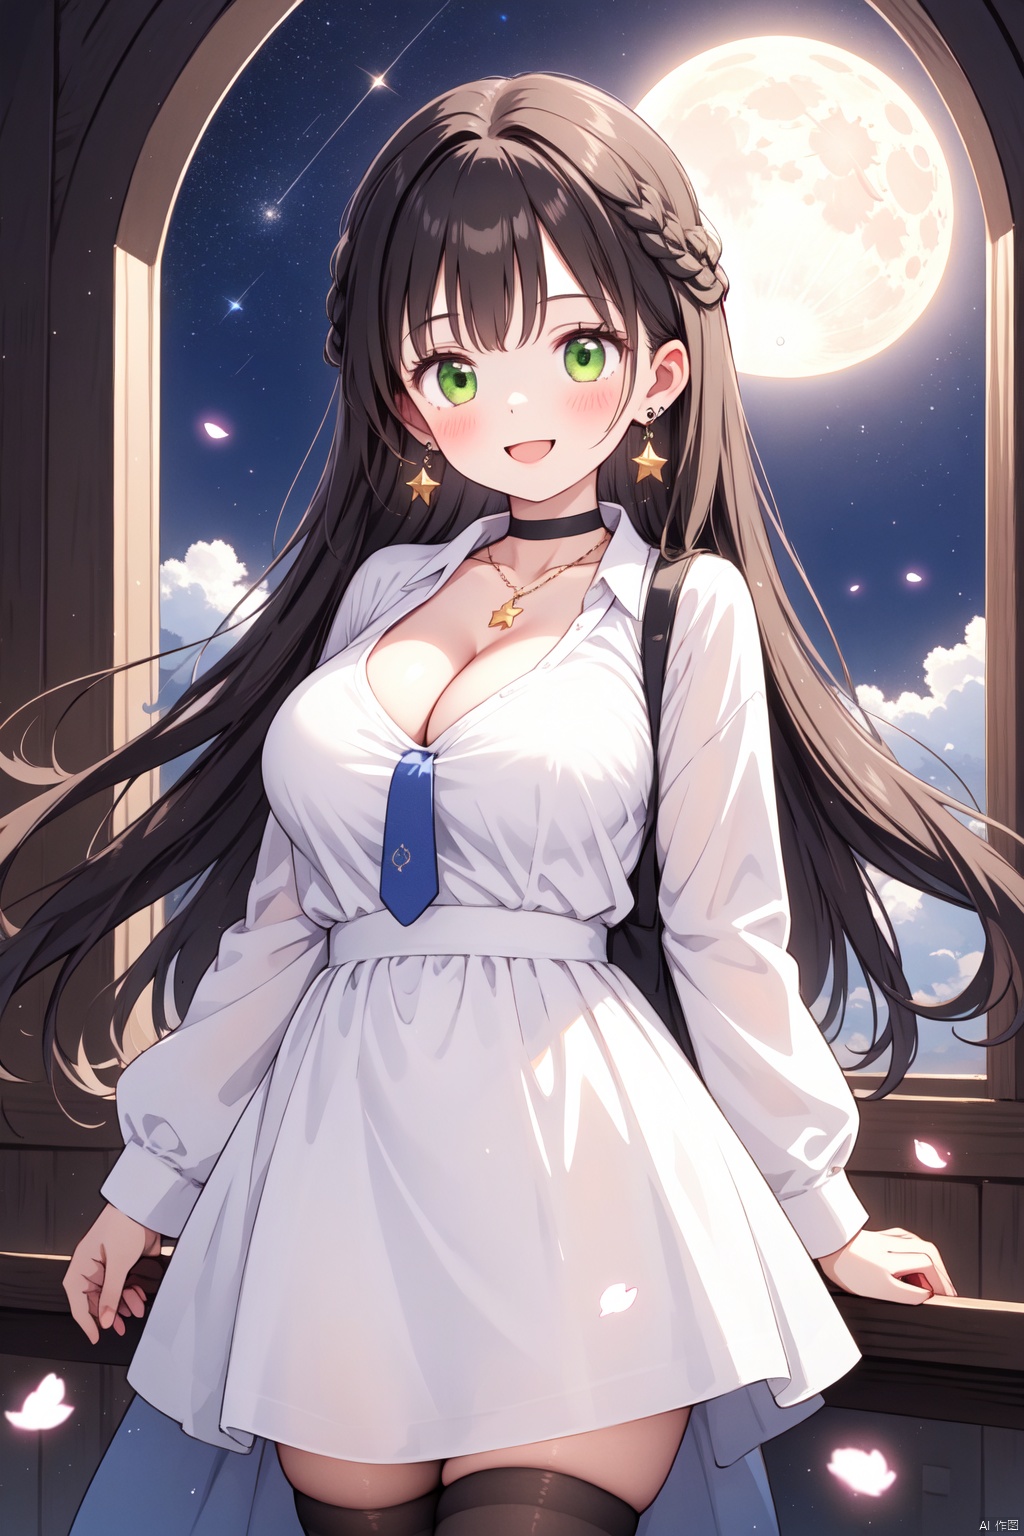  1girl, bangs, black_necktie, blush, book, braid, breasts, card_\(medium\), choker, cleavage, clipboard, crescent_moon, earrings, earth_\(planet\), flower, full_moon, glint, green_eyes, holding, jewelry, large_breasts, long_hair, long_sleeves, looking_at_viewer, moon, moonlight, necktie, necktie_between_breasts, night, night_sky, open_mouth, paper, petals, planet, red_moon, shooting_star, sky, smile, solo, sparkle, sparkle_background, star_\(sky\), star_\(symbol\), starry_sky, sun, thighhighs, very_long_hair, window, maolilan